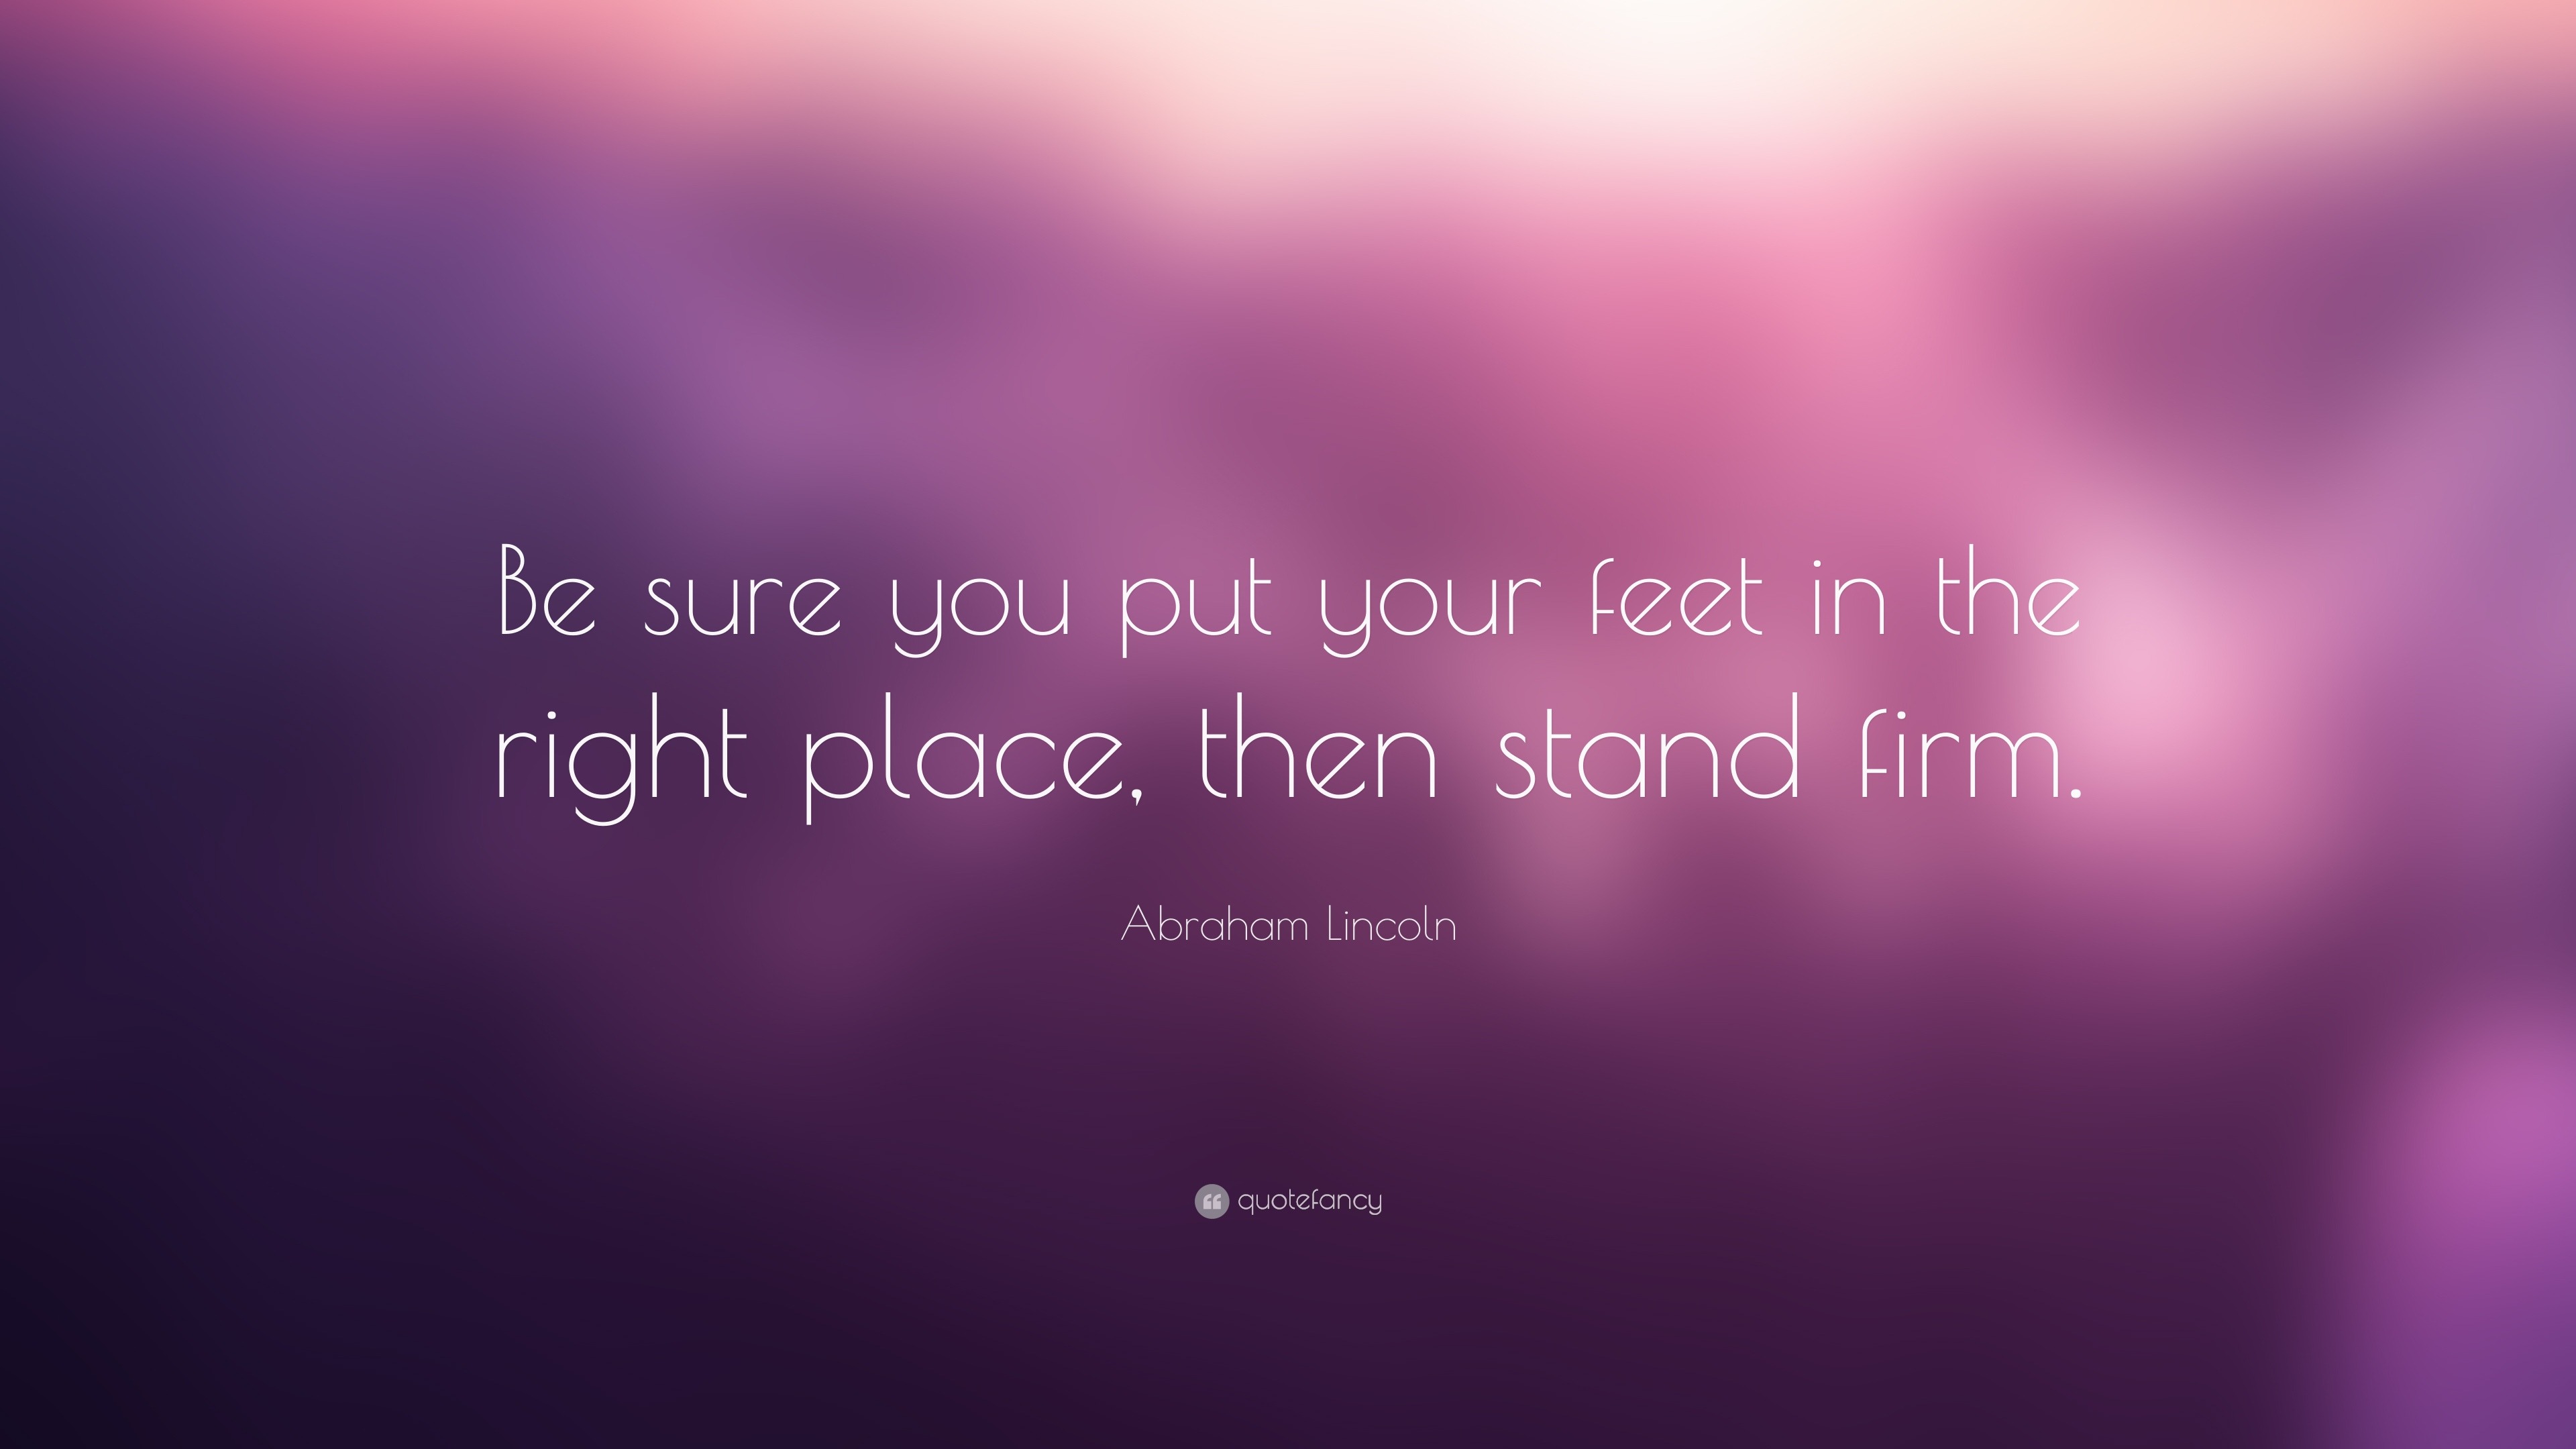 Download Abraham Lincoln Quote: "Be sure you put your feet in the ...